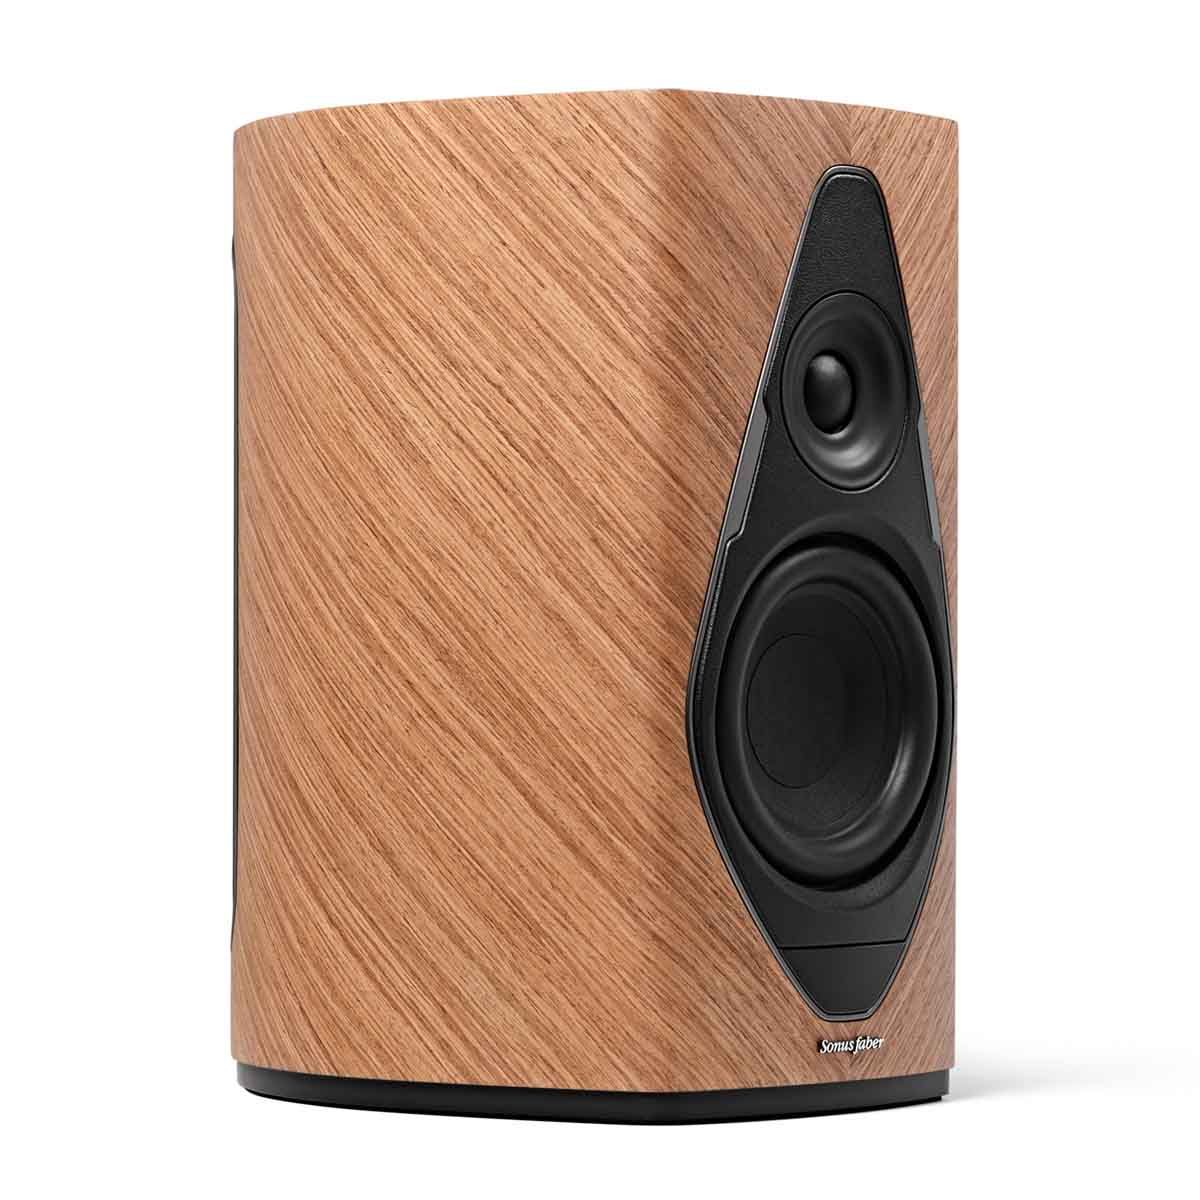 Sonus Faber Duetto Wireless Speaker System angled front view without grille